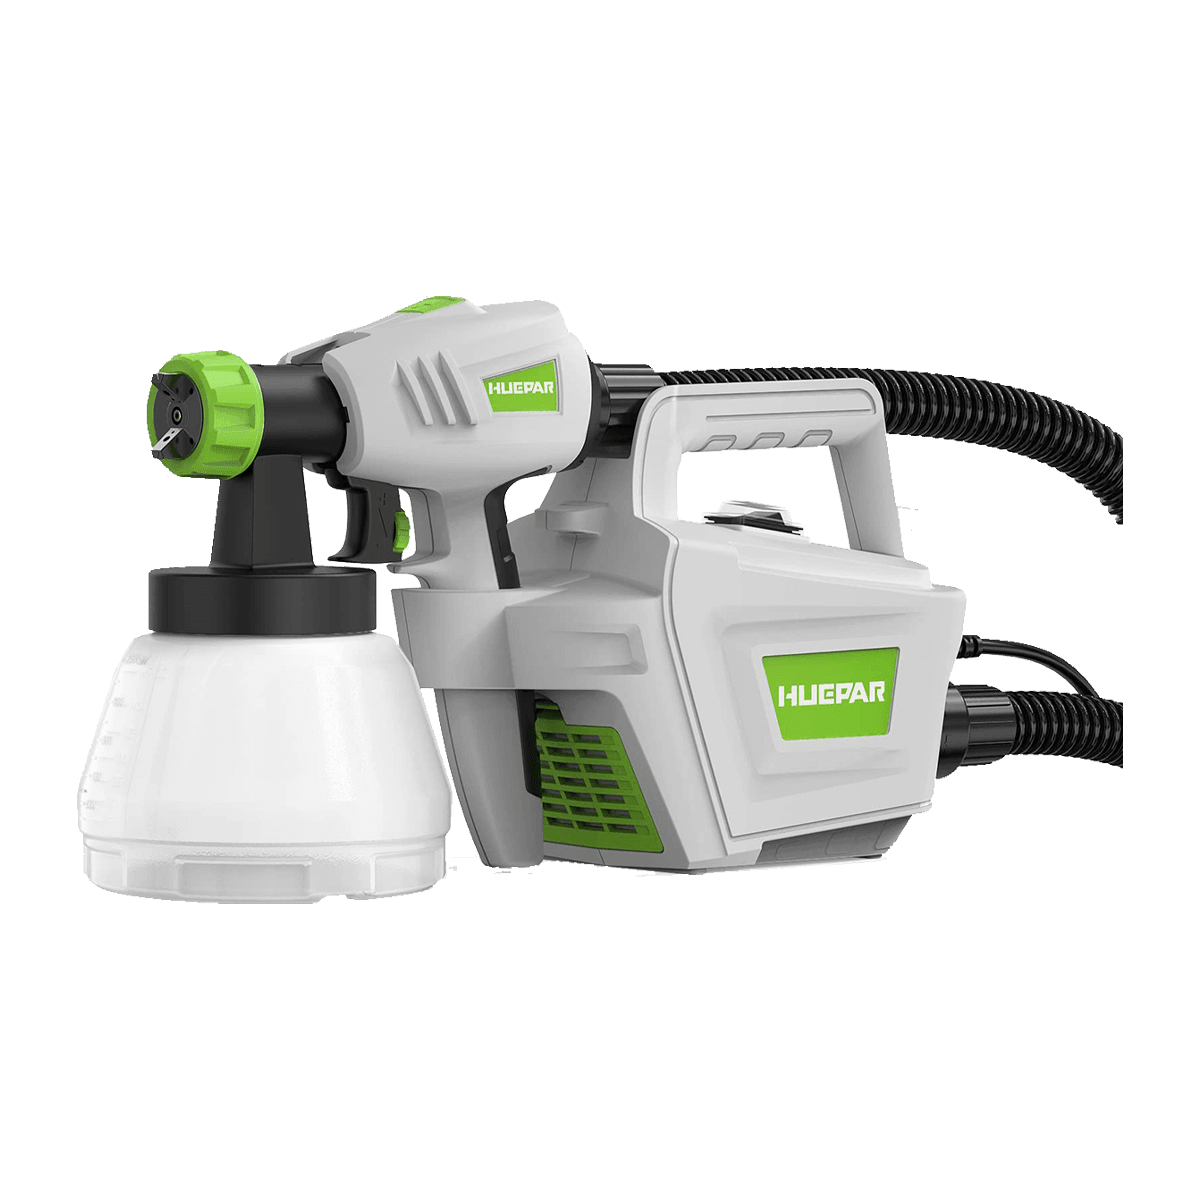 Huepar Tools SG800 HVLP electric paint sprayer with 4 metal nozzles and 3 patterns, ideal for home interior and exterior walls, house painting, ceiling, fence, cabinet, chair0